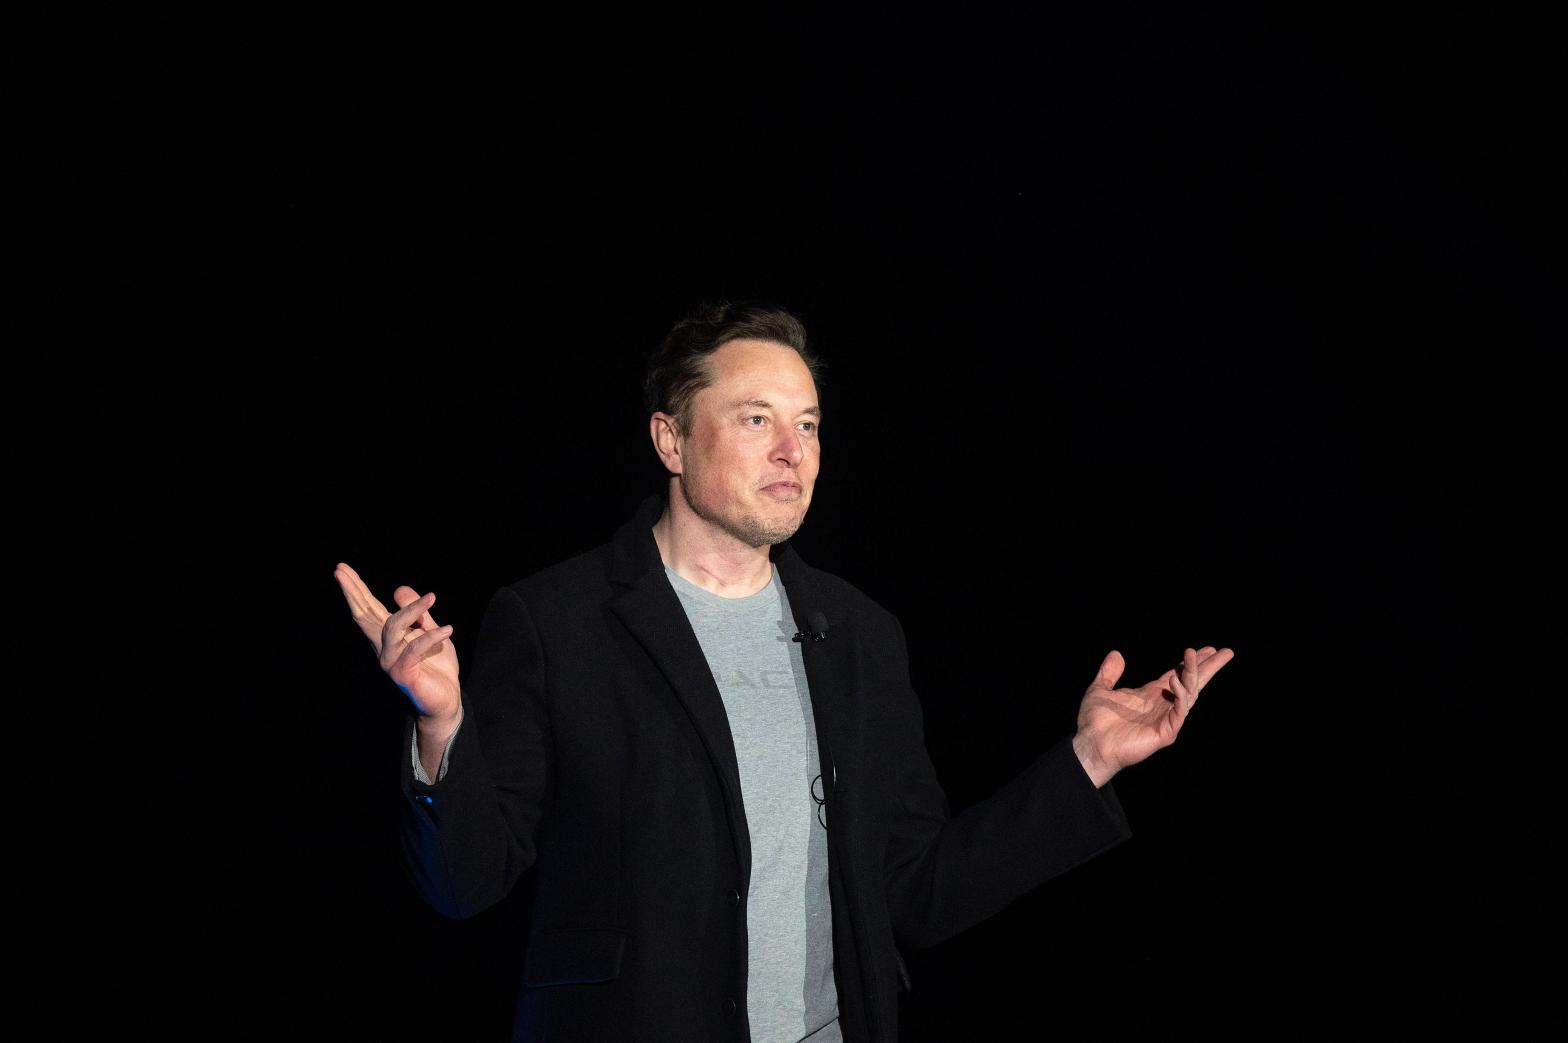 Elon Musk speaking at a press conference at SpaceX's Starbase facility near Boca Chica Village in South Texas on February 10, 2022. (Photo: JIM WATSON / AFP, Getty Images)